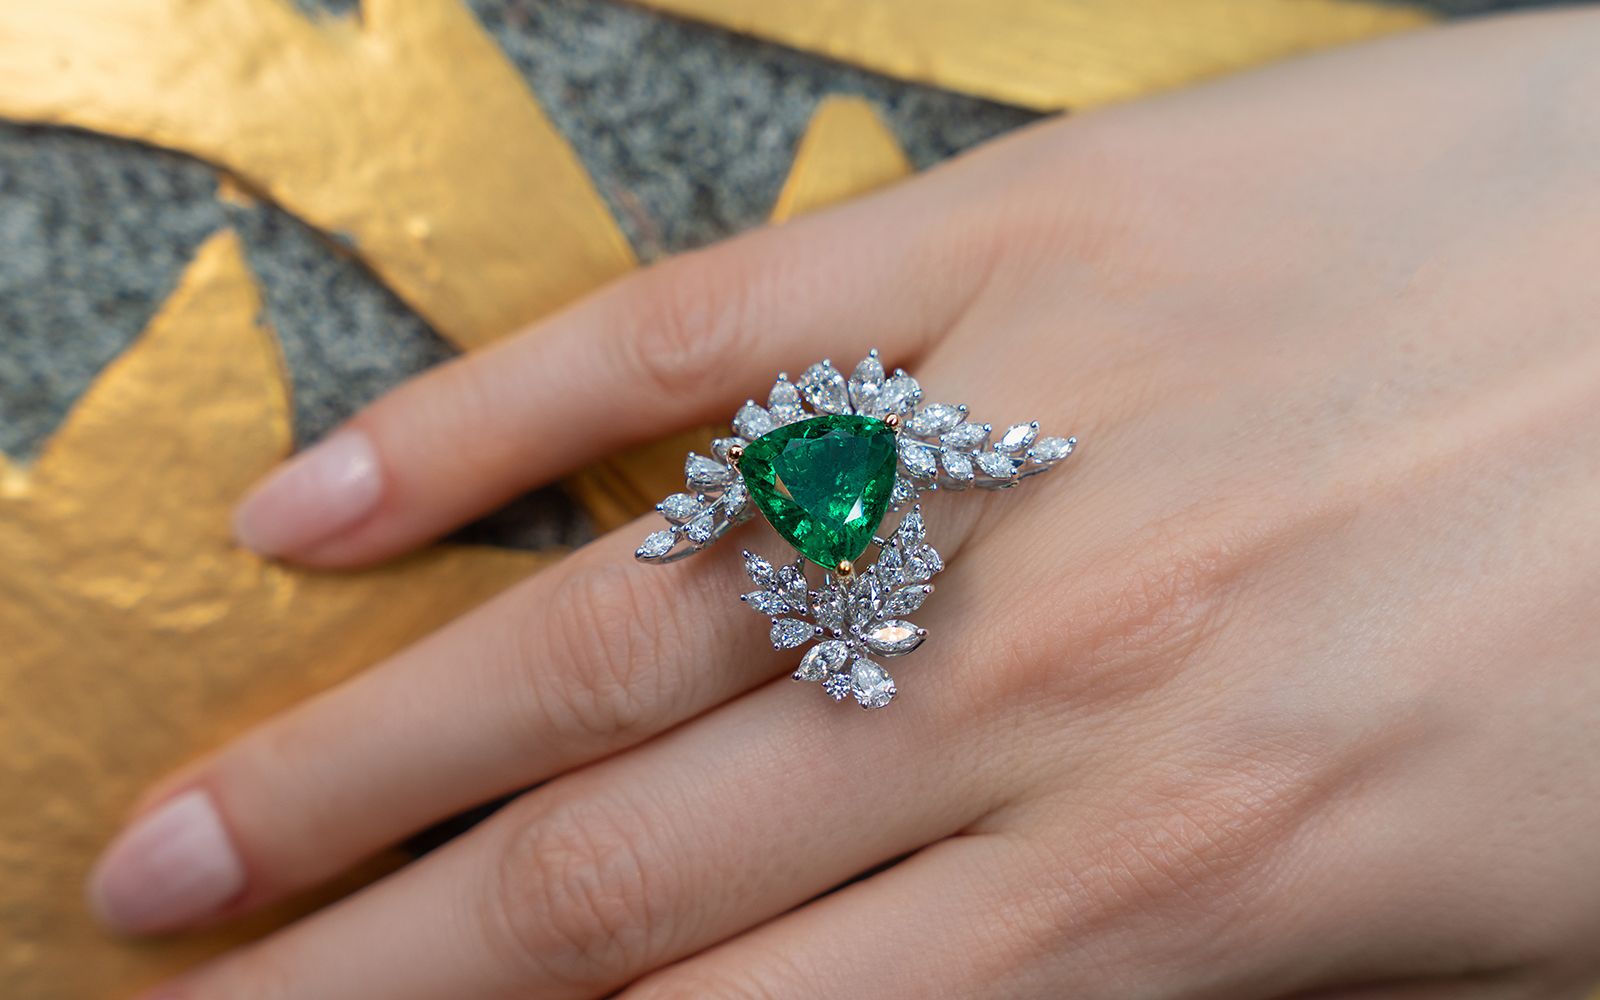 Caratell ring with a 6.99-carat Ethiopian emerald and diamond-set foliage